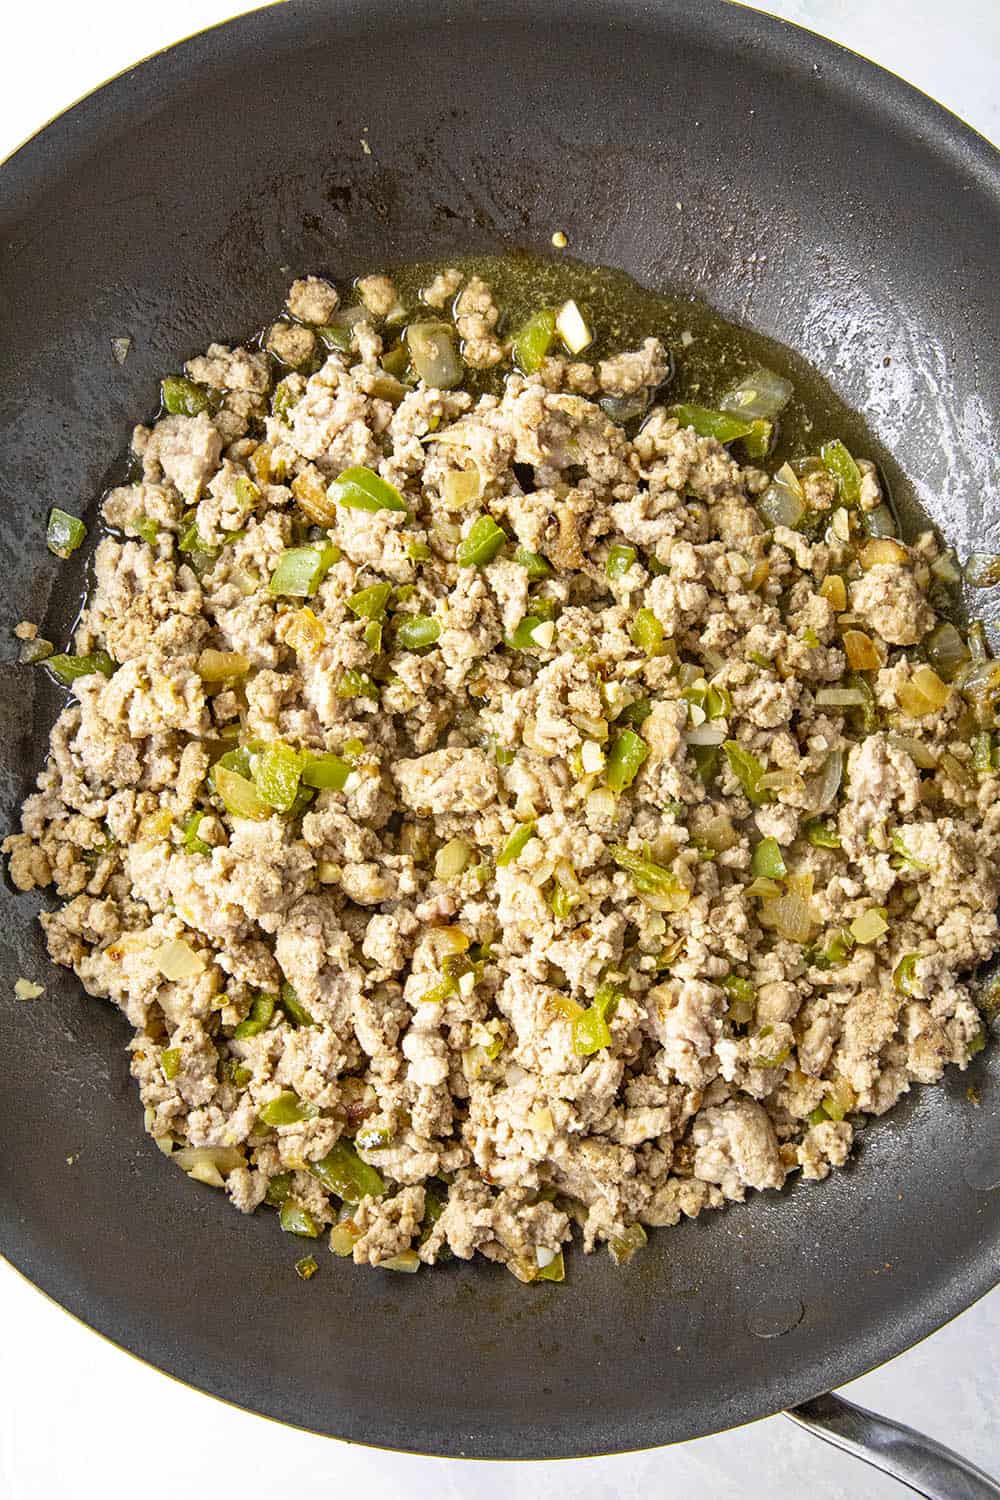 Cooked ground turkey, though you can use ground beef, pork or chicken